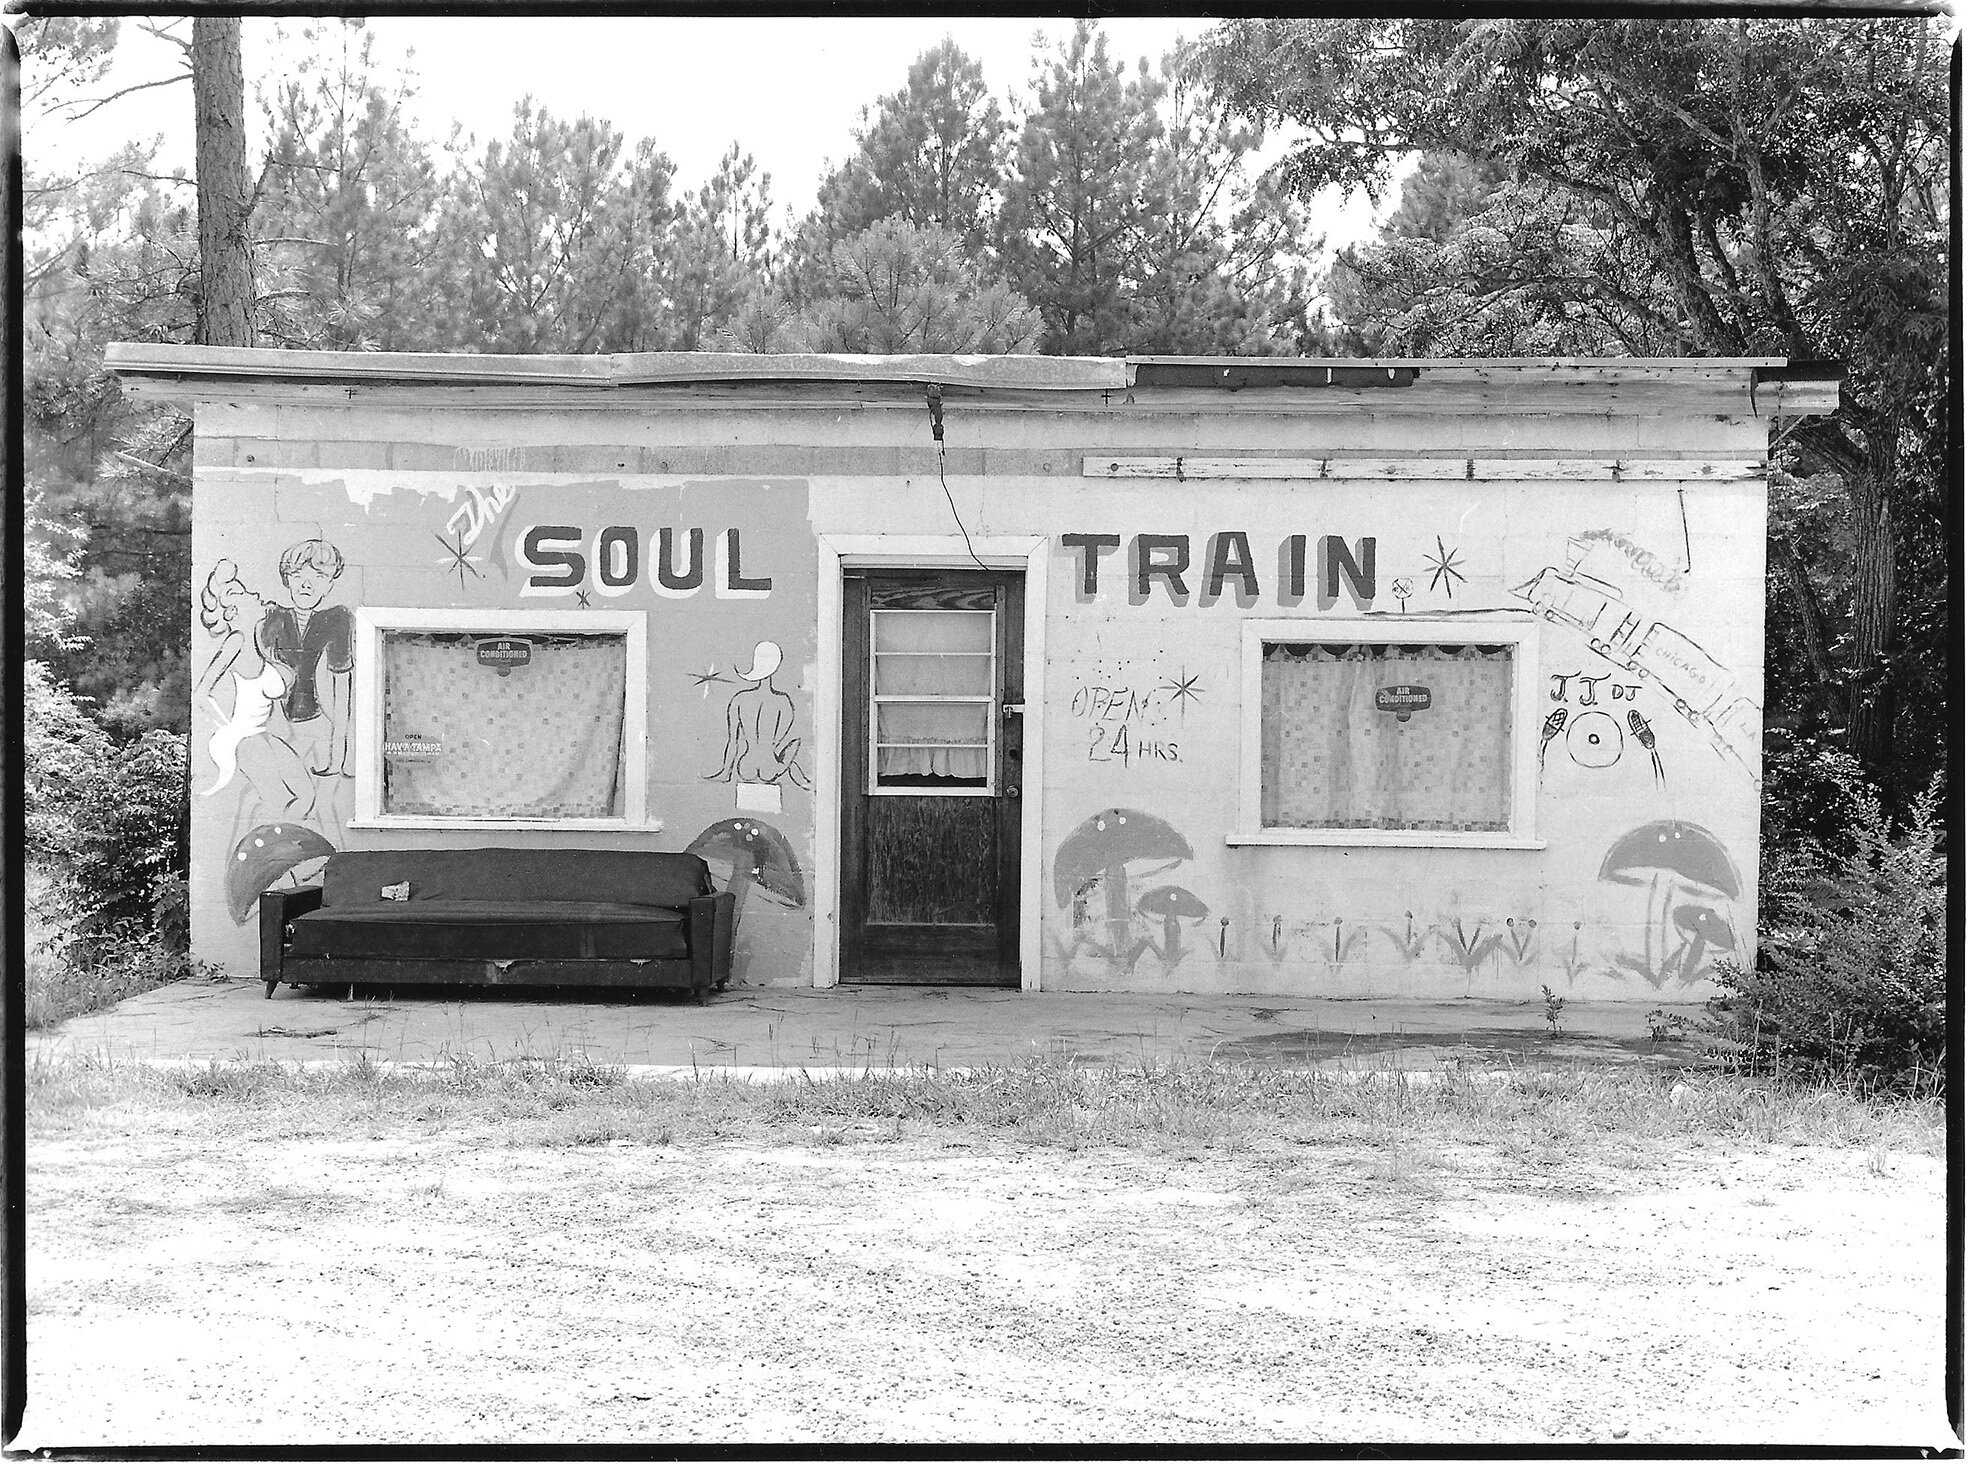   Juke Joint on Hwy 27, Early County, GA  Image: 1980/printed: 2020 Gelatin silver print 8 5⁄8 x 11 1⁄2 in. (image size) The Do Good Fund, Inc., 2020-068 